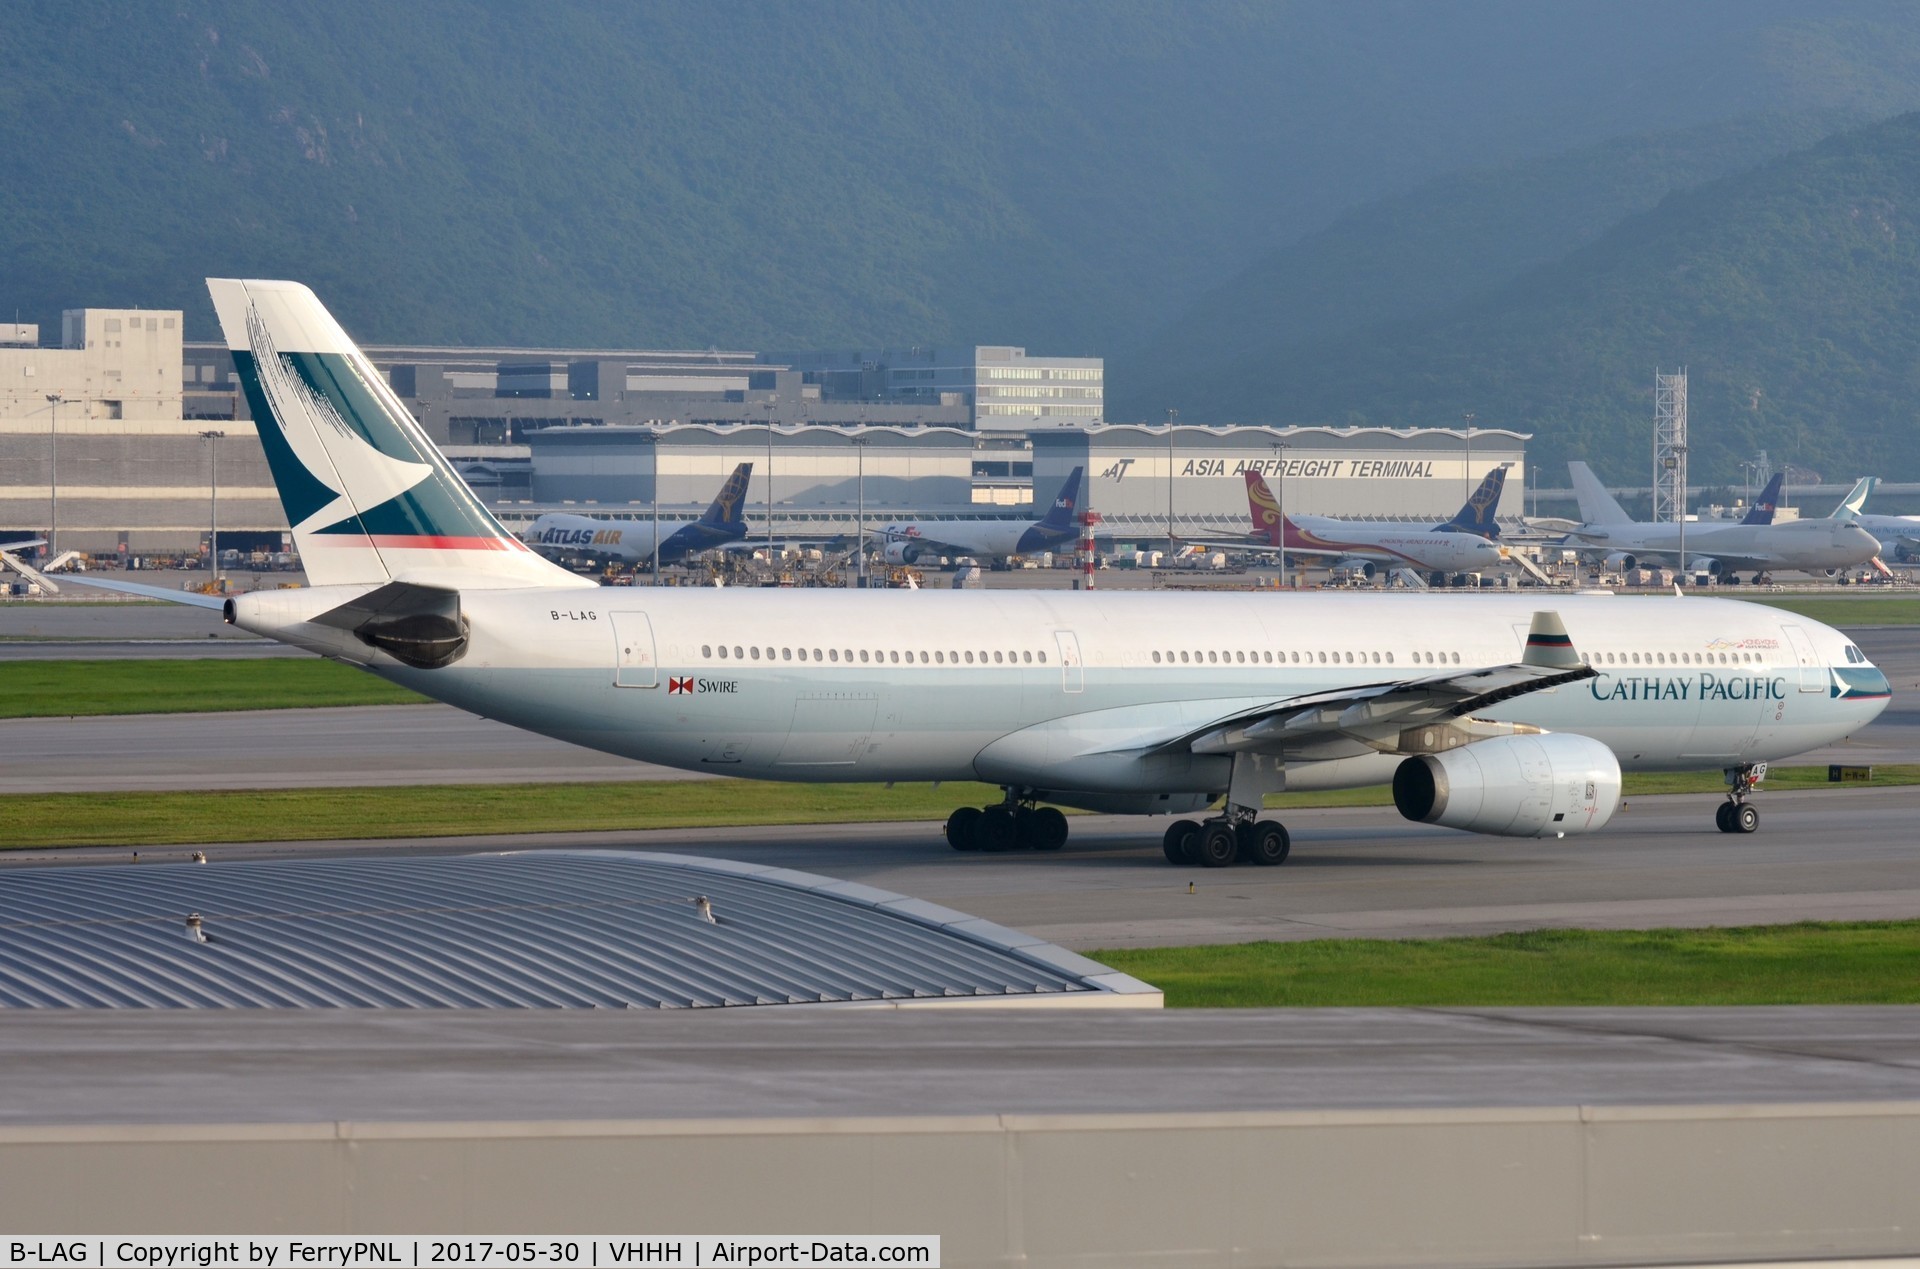 B-LAG, 2007 Airbus A330-343X C/N 895, Cathay A333 taxying for departure